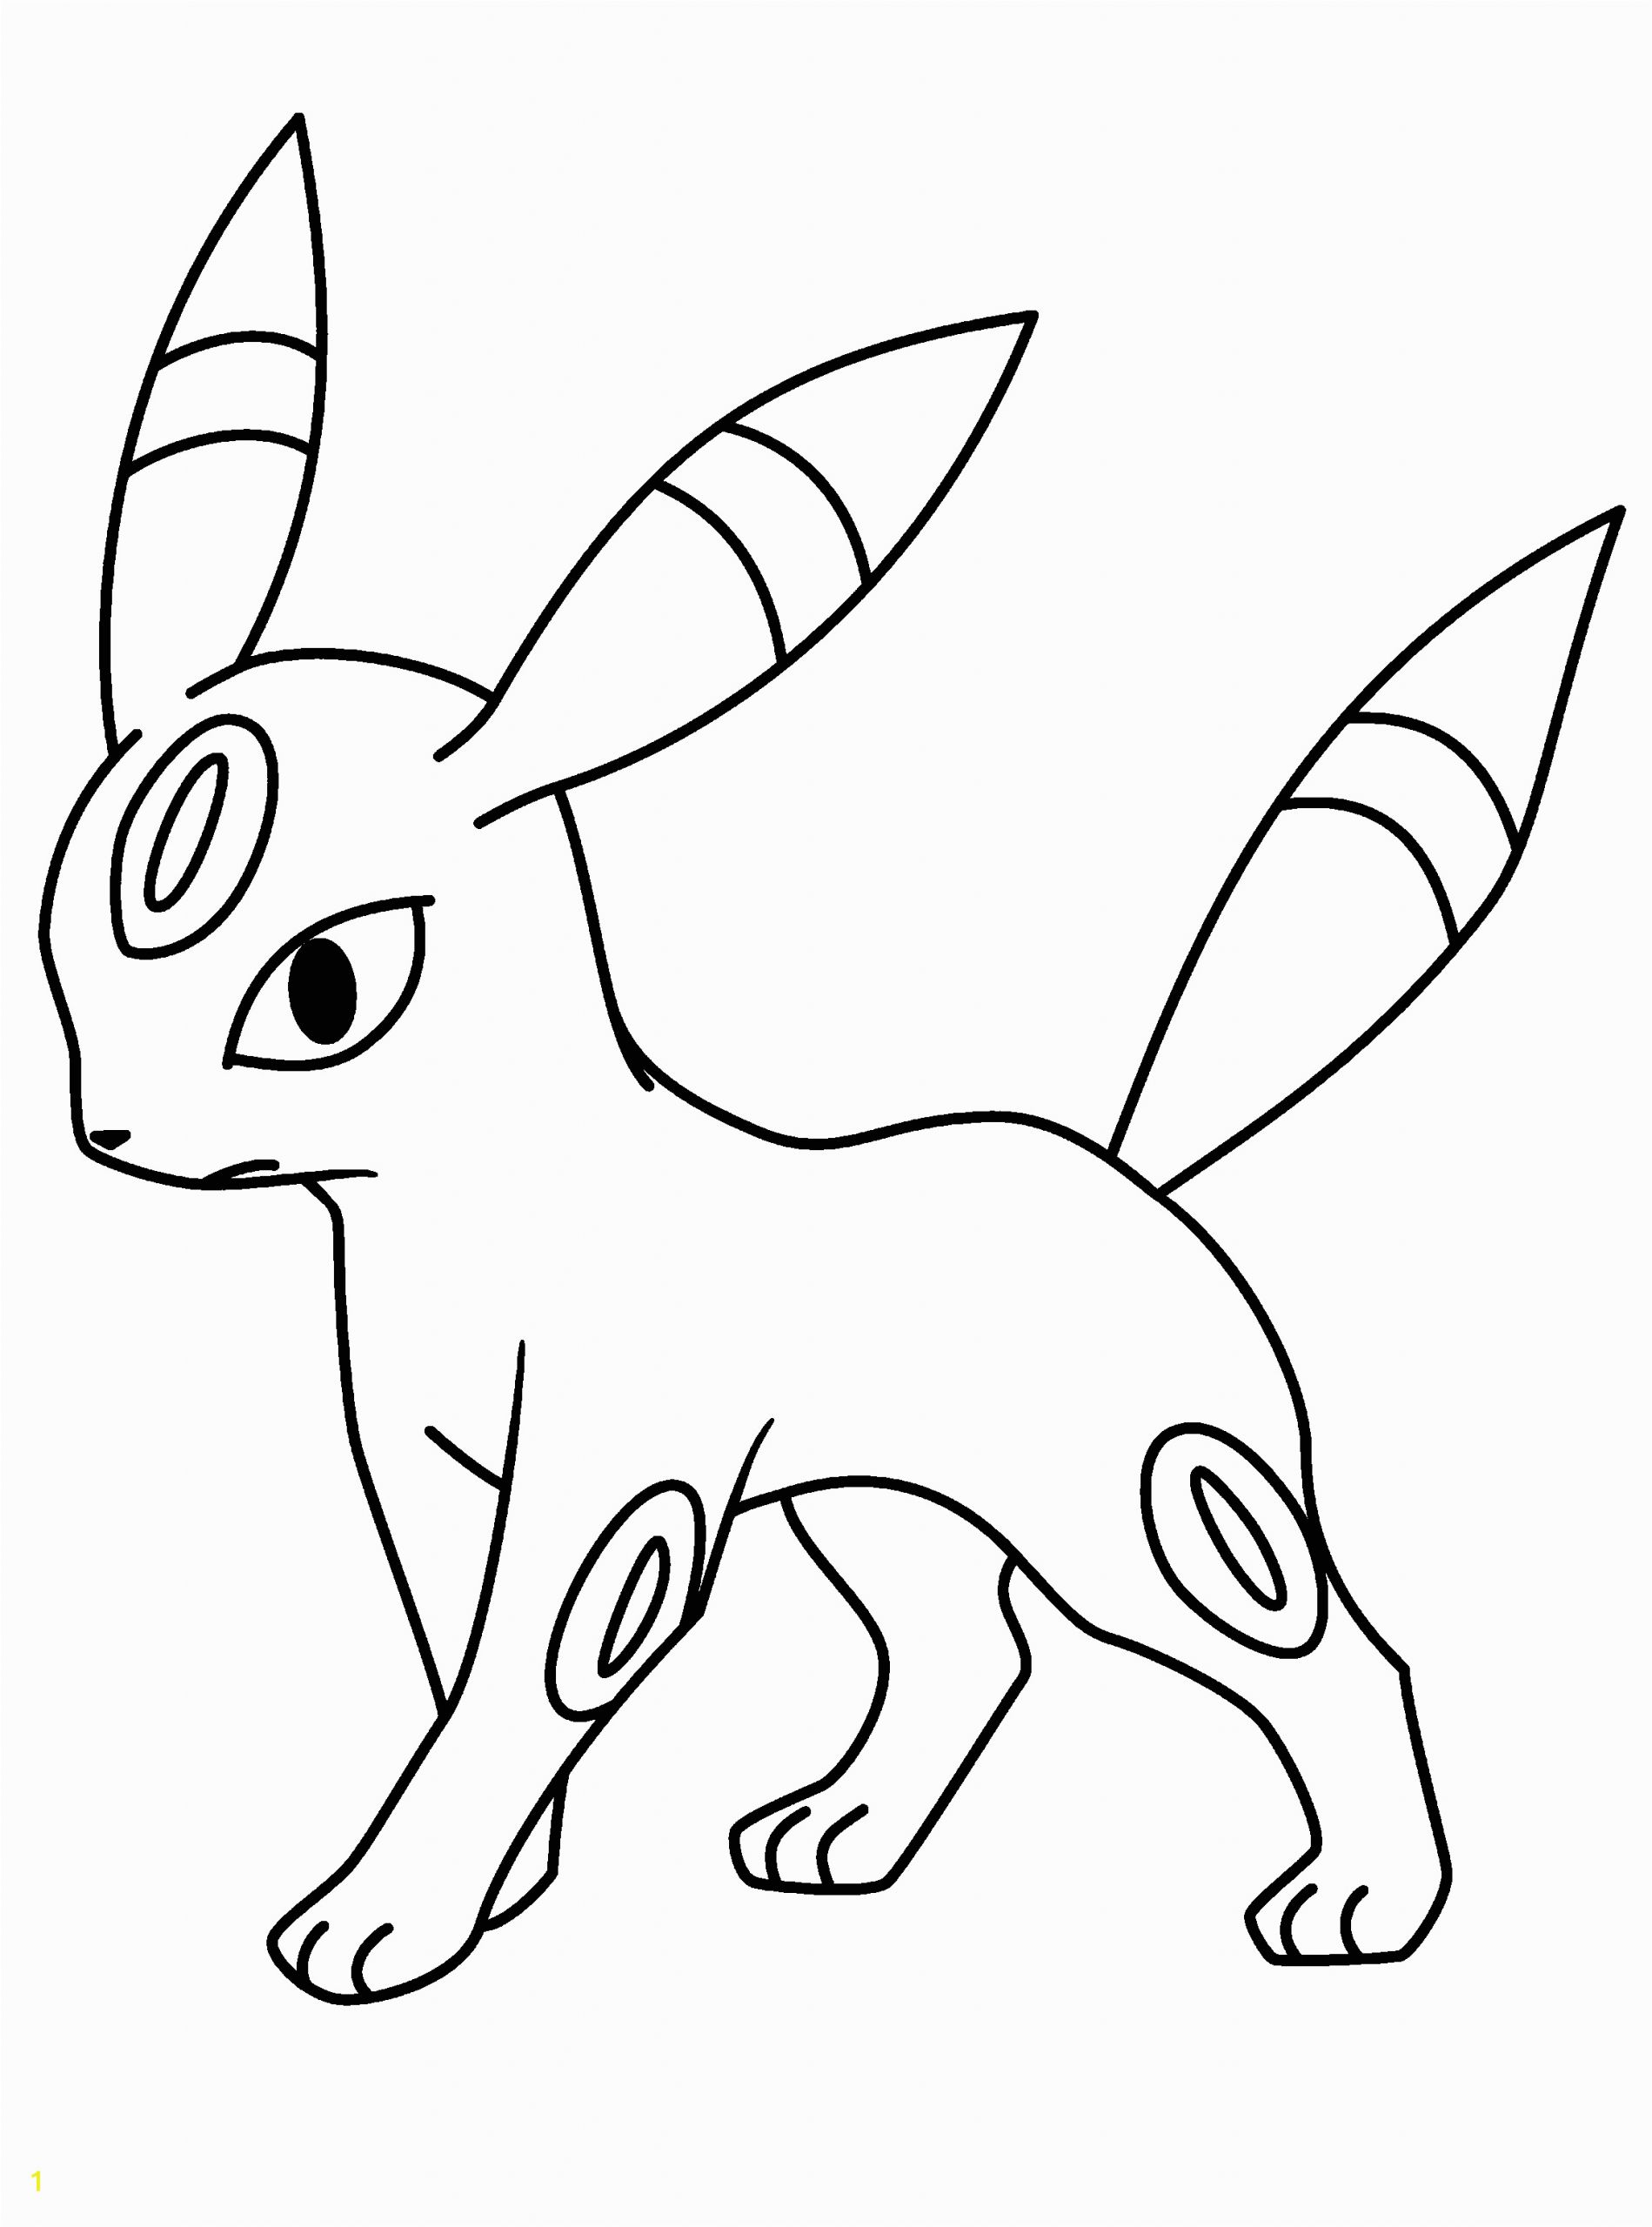 Eevee Pokemon Coloring Pages Pin by Get Highit On Coloring Pages